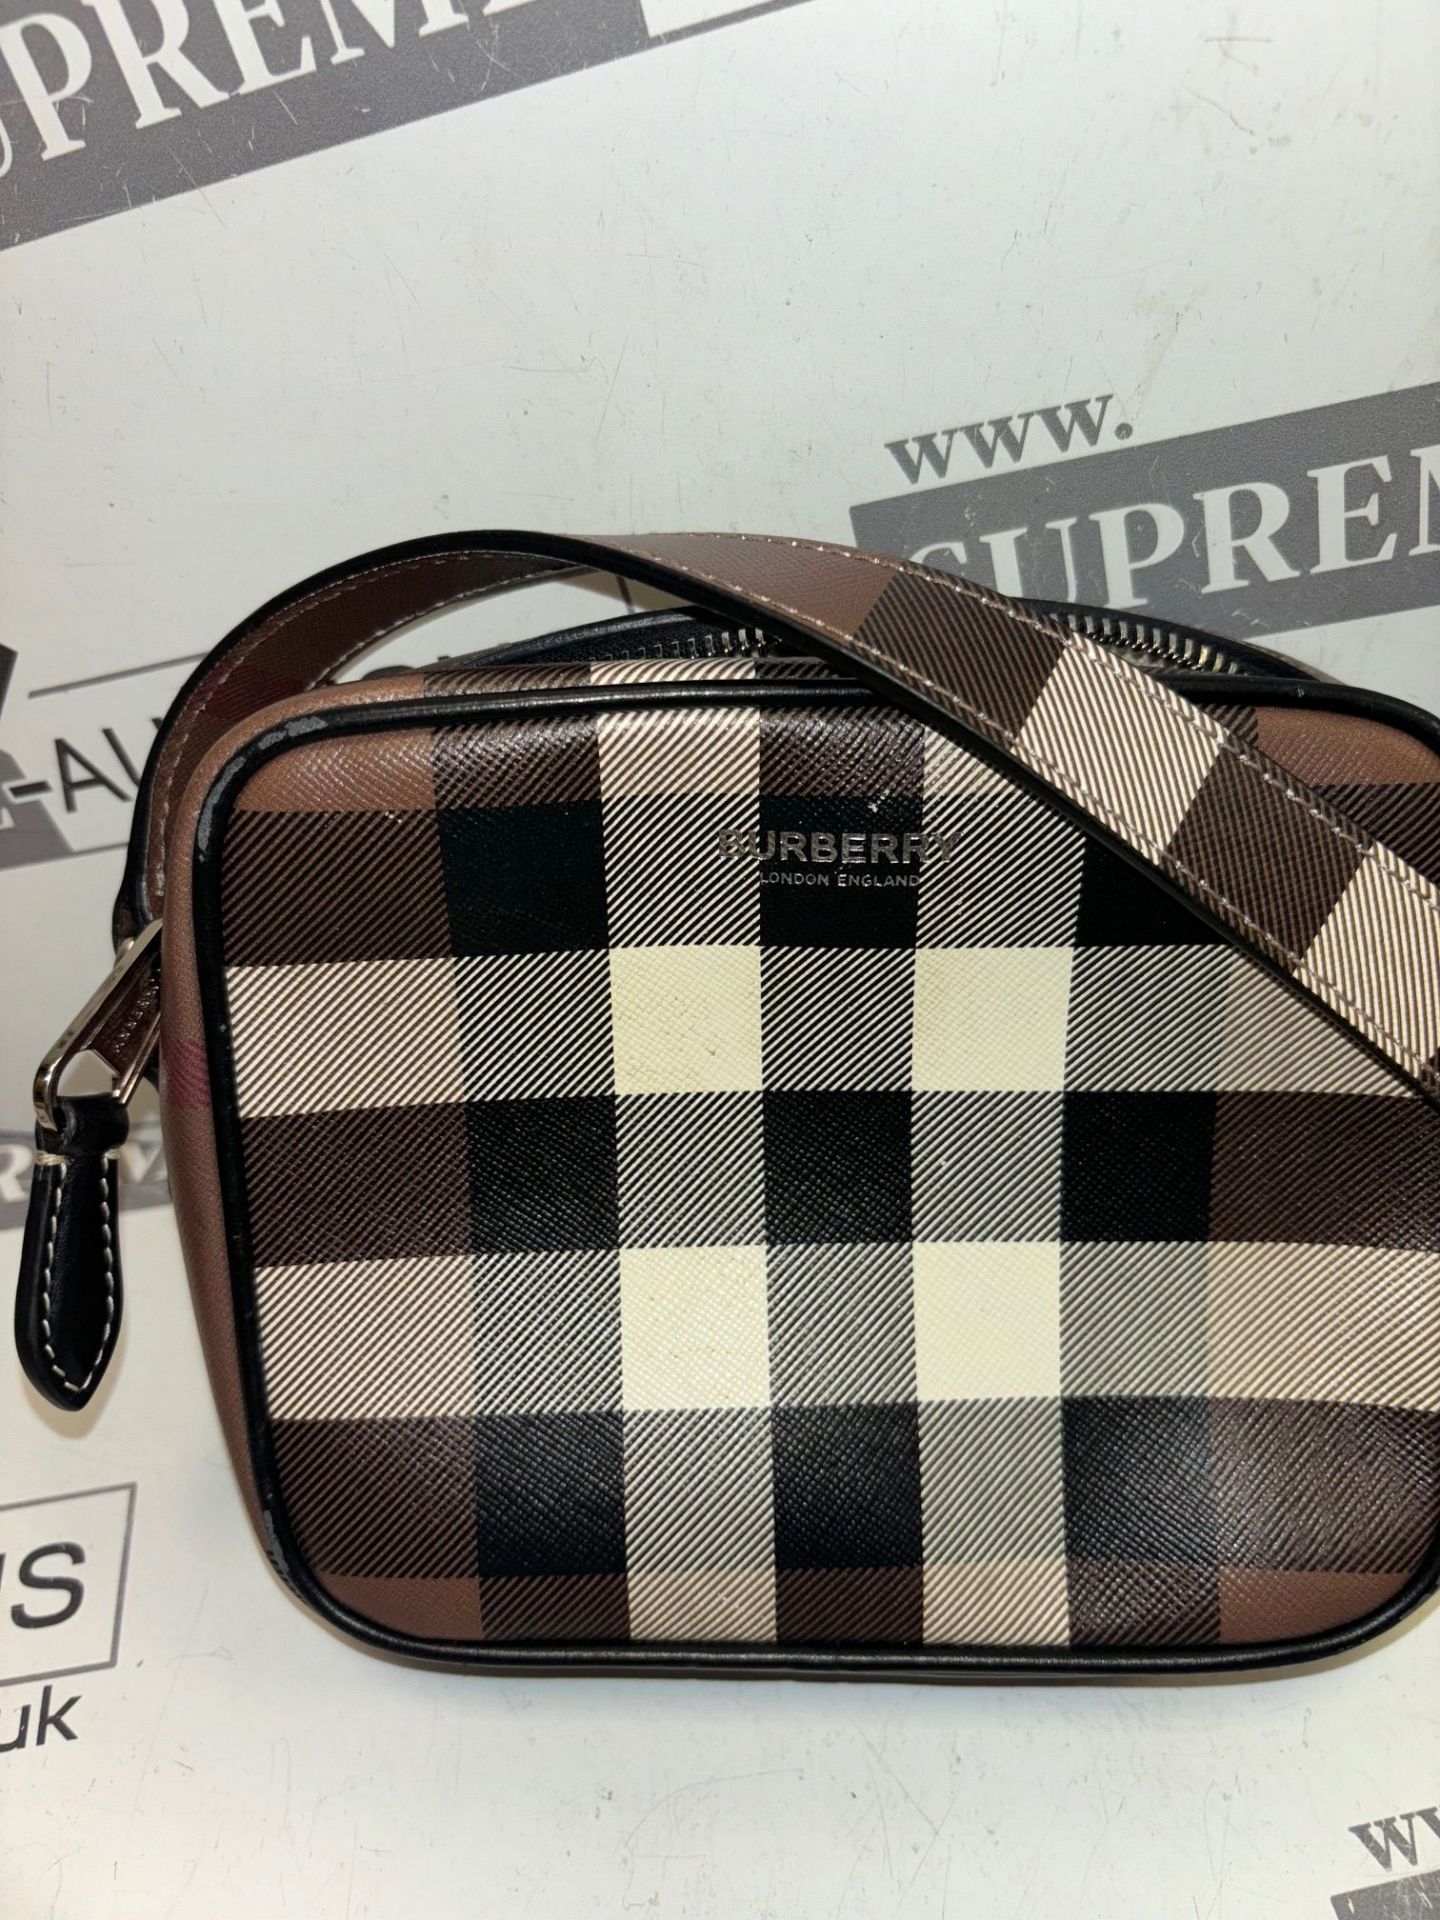 Burberry Shoulder Bag Check Coated Canvas Brown. 16x13cm. (14.21) - Image 8 of 9